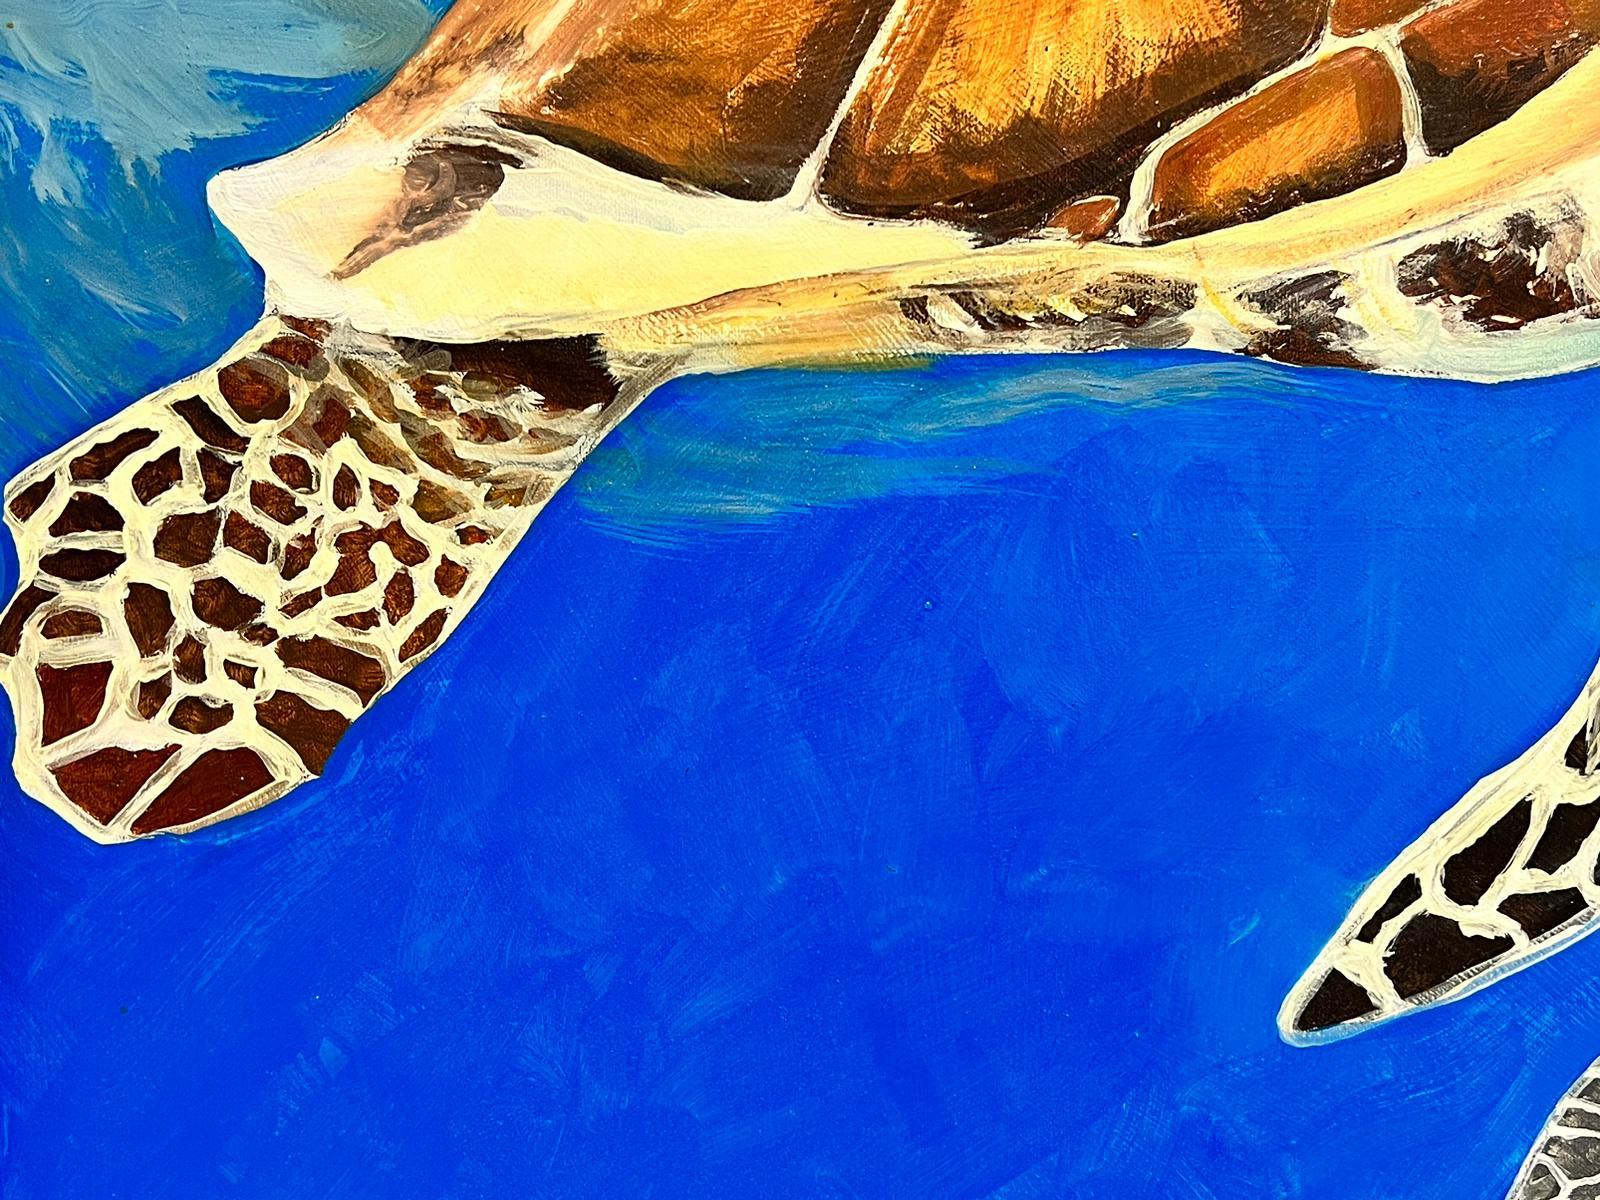 Sea Turtles Swimming in Blue Sea Large Contemporary British Painting on Canvas For Sale 1